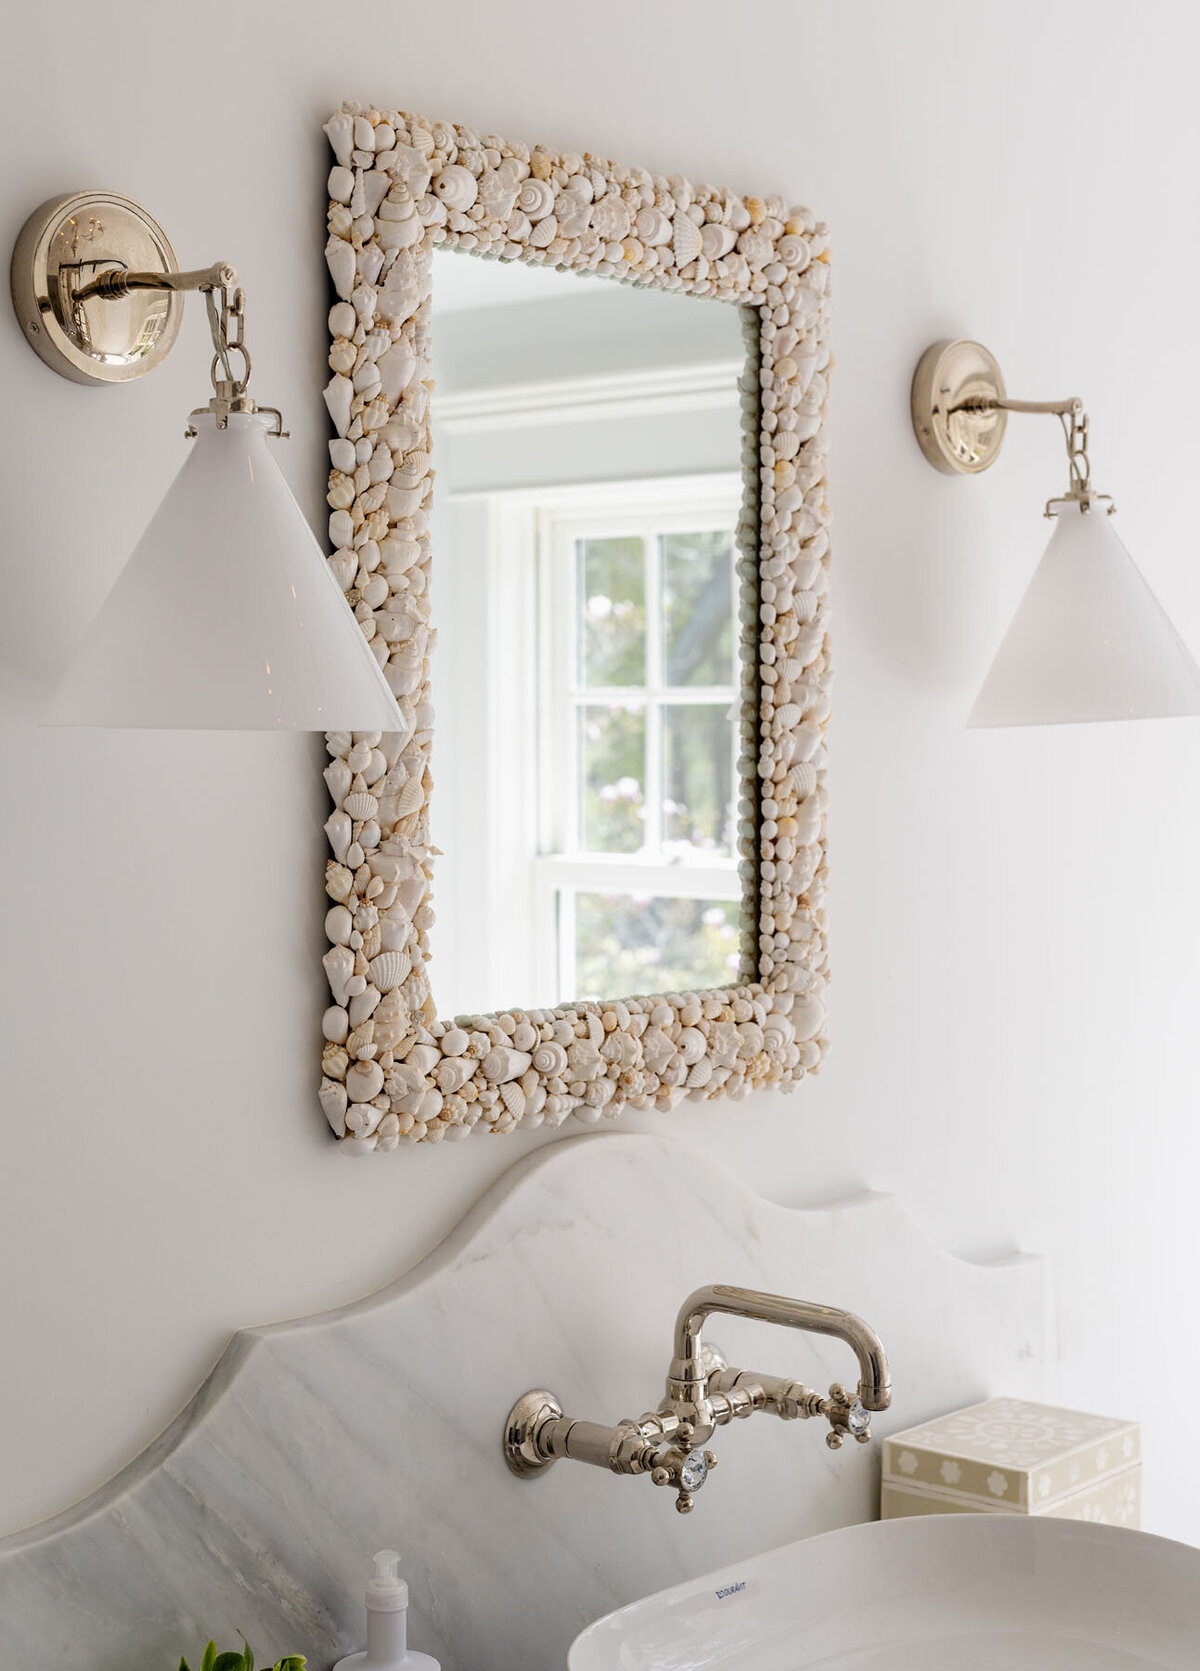 018-shell mirror-with-brass-fixtures